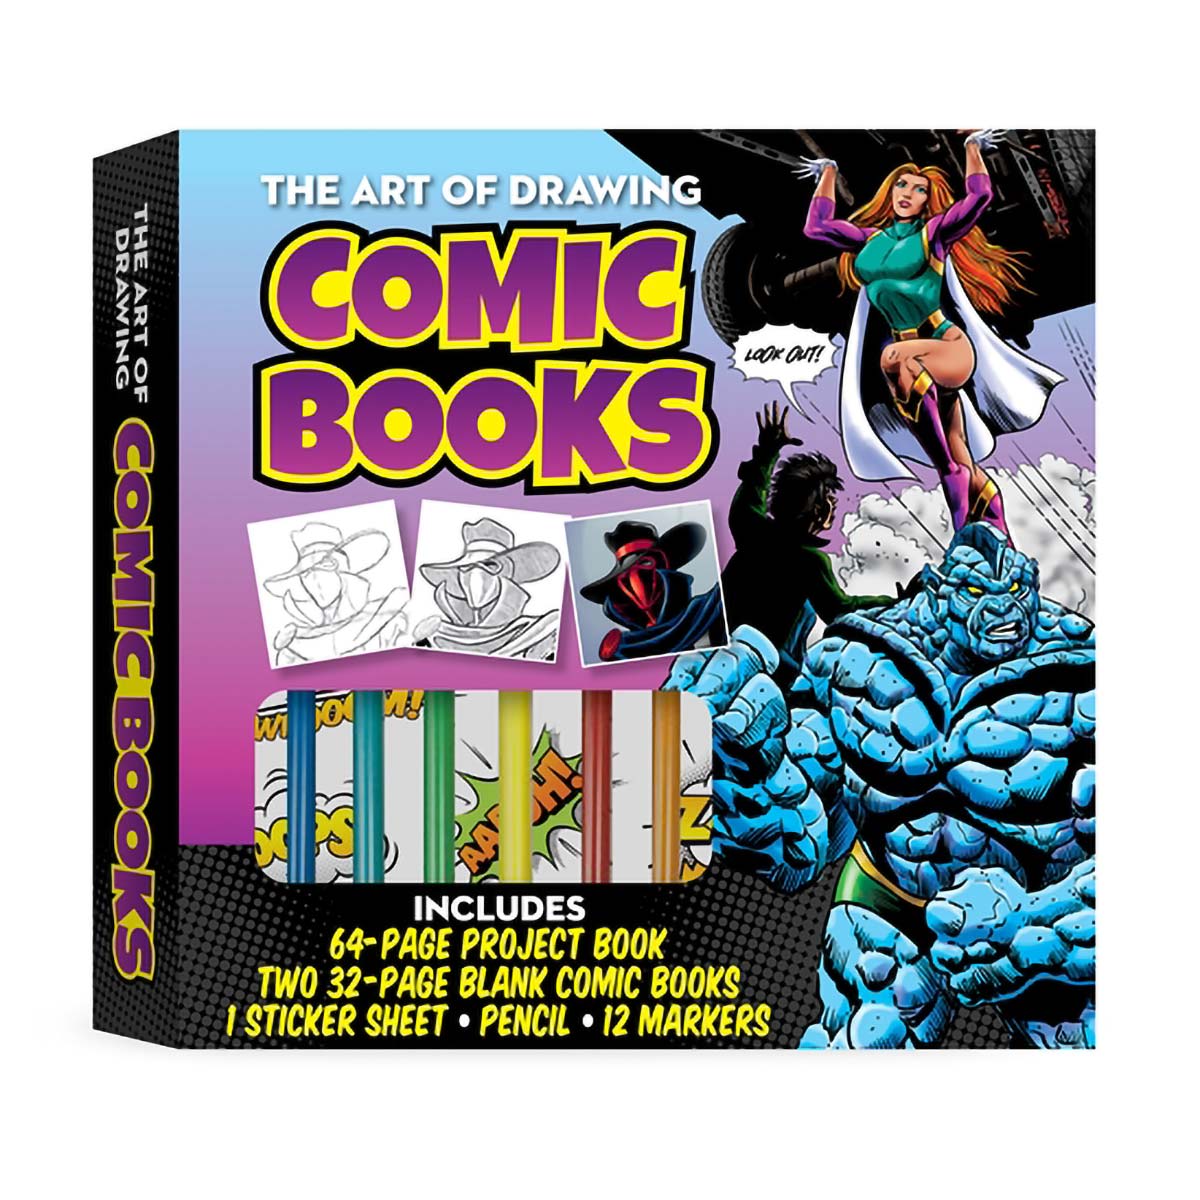 Walter Foster - The Art of Drawing Comic Books.